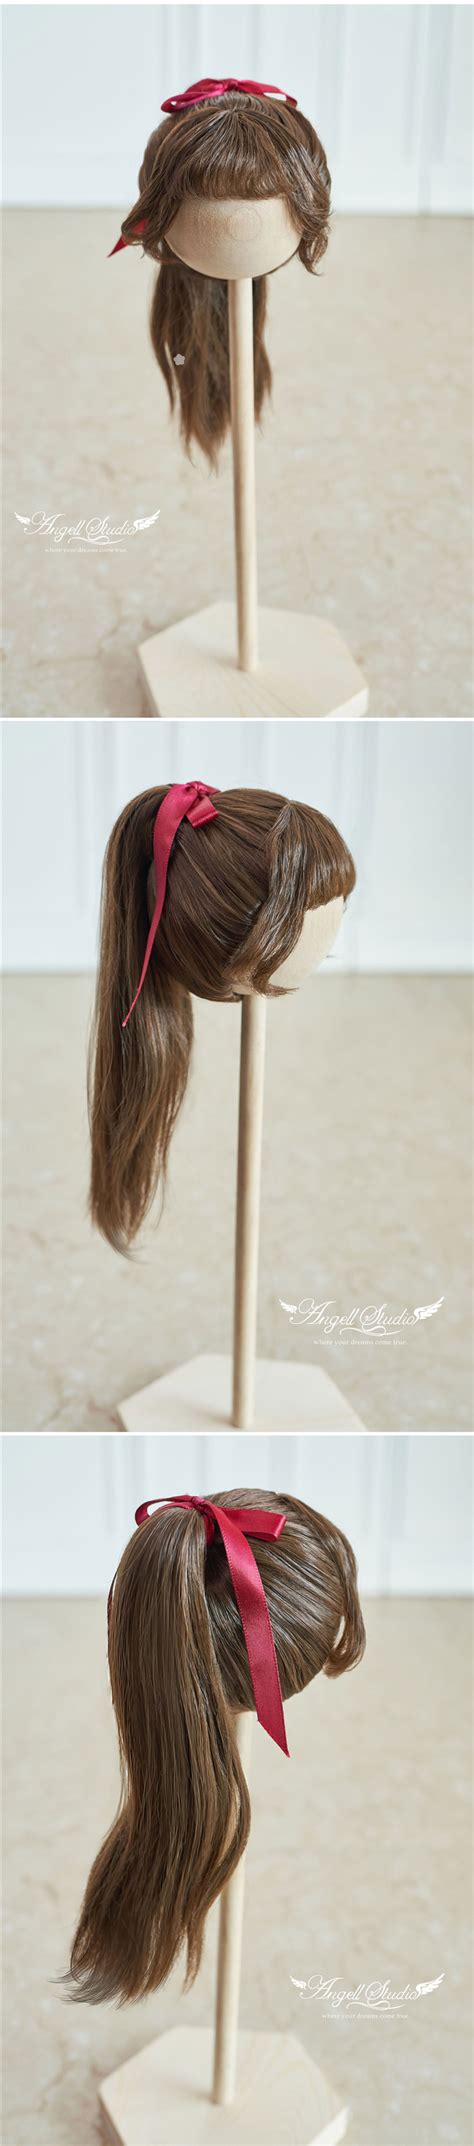 BJD Wig Brown High Tail Curly Hair WG322033 For SD Size Ball Jointed